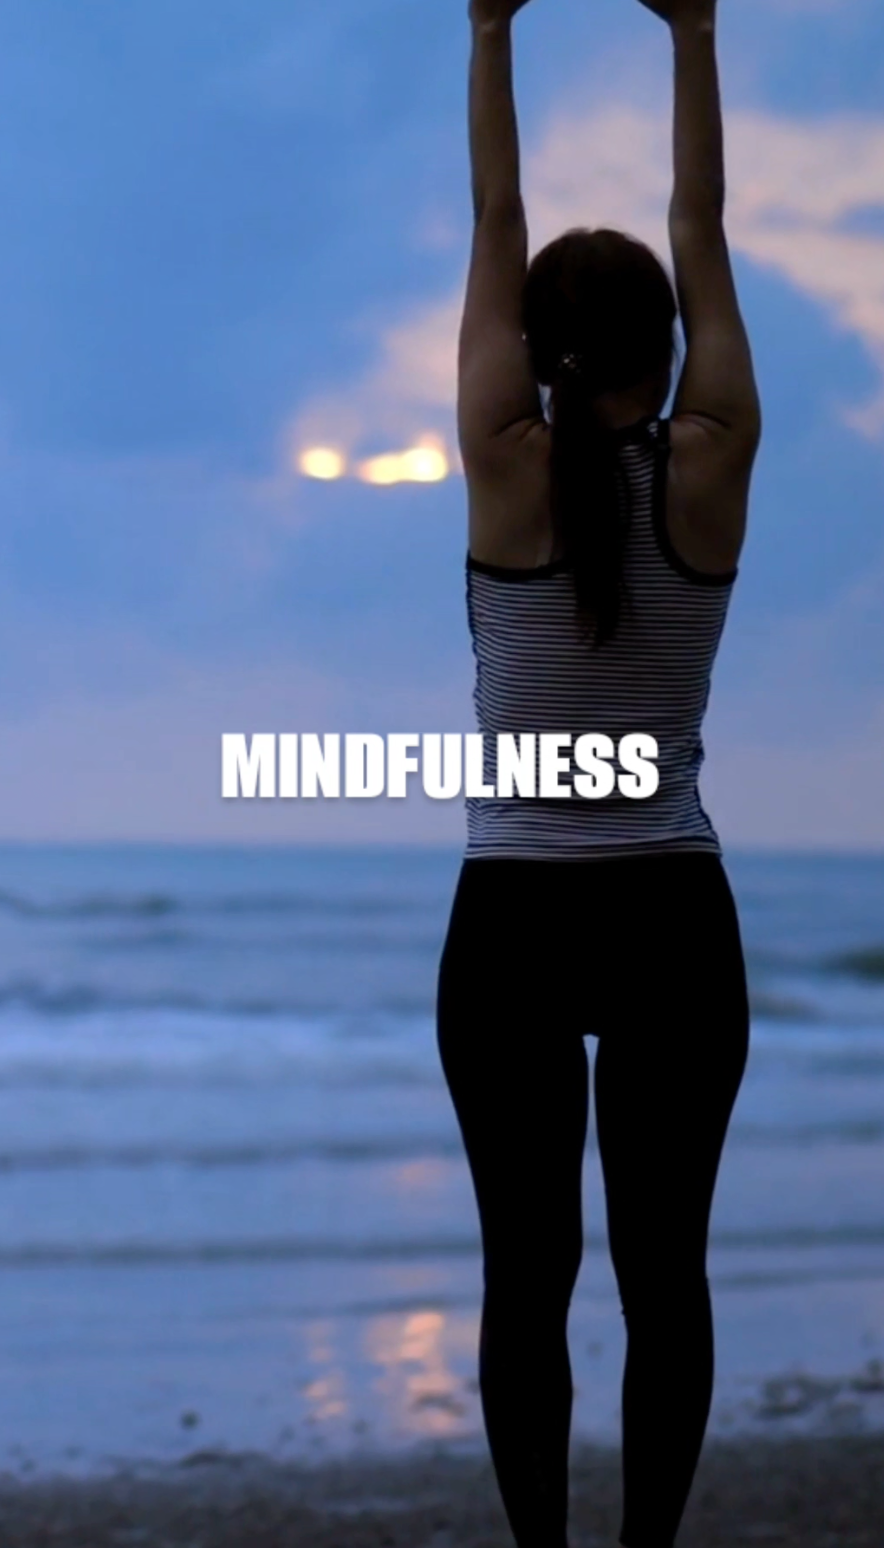 Exercise combined with mindfulness is the best for mental health